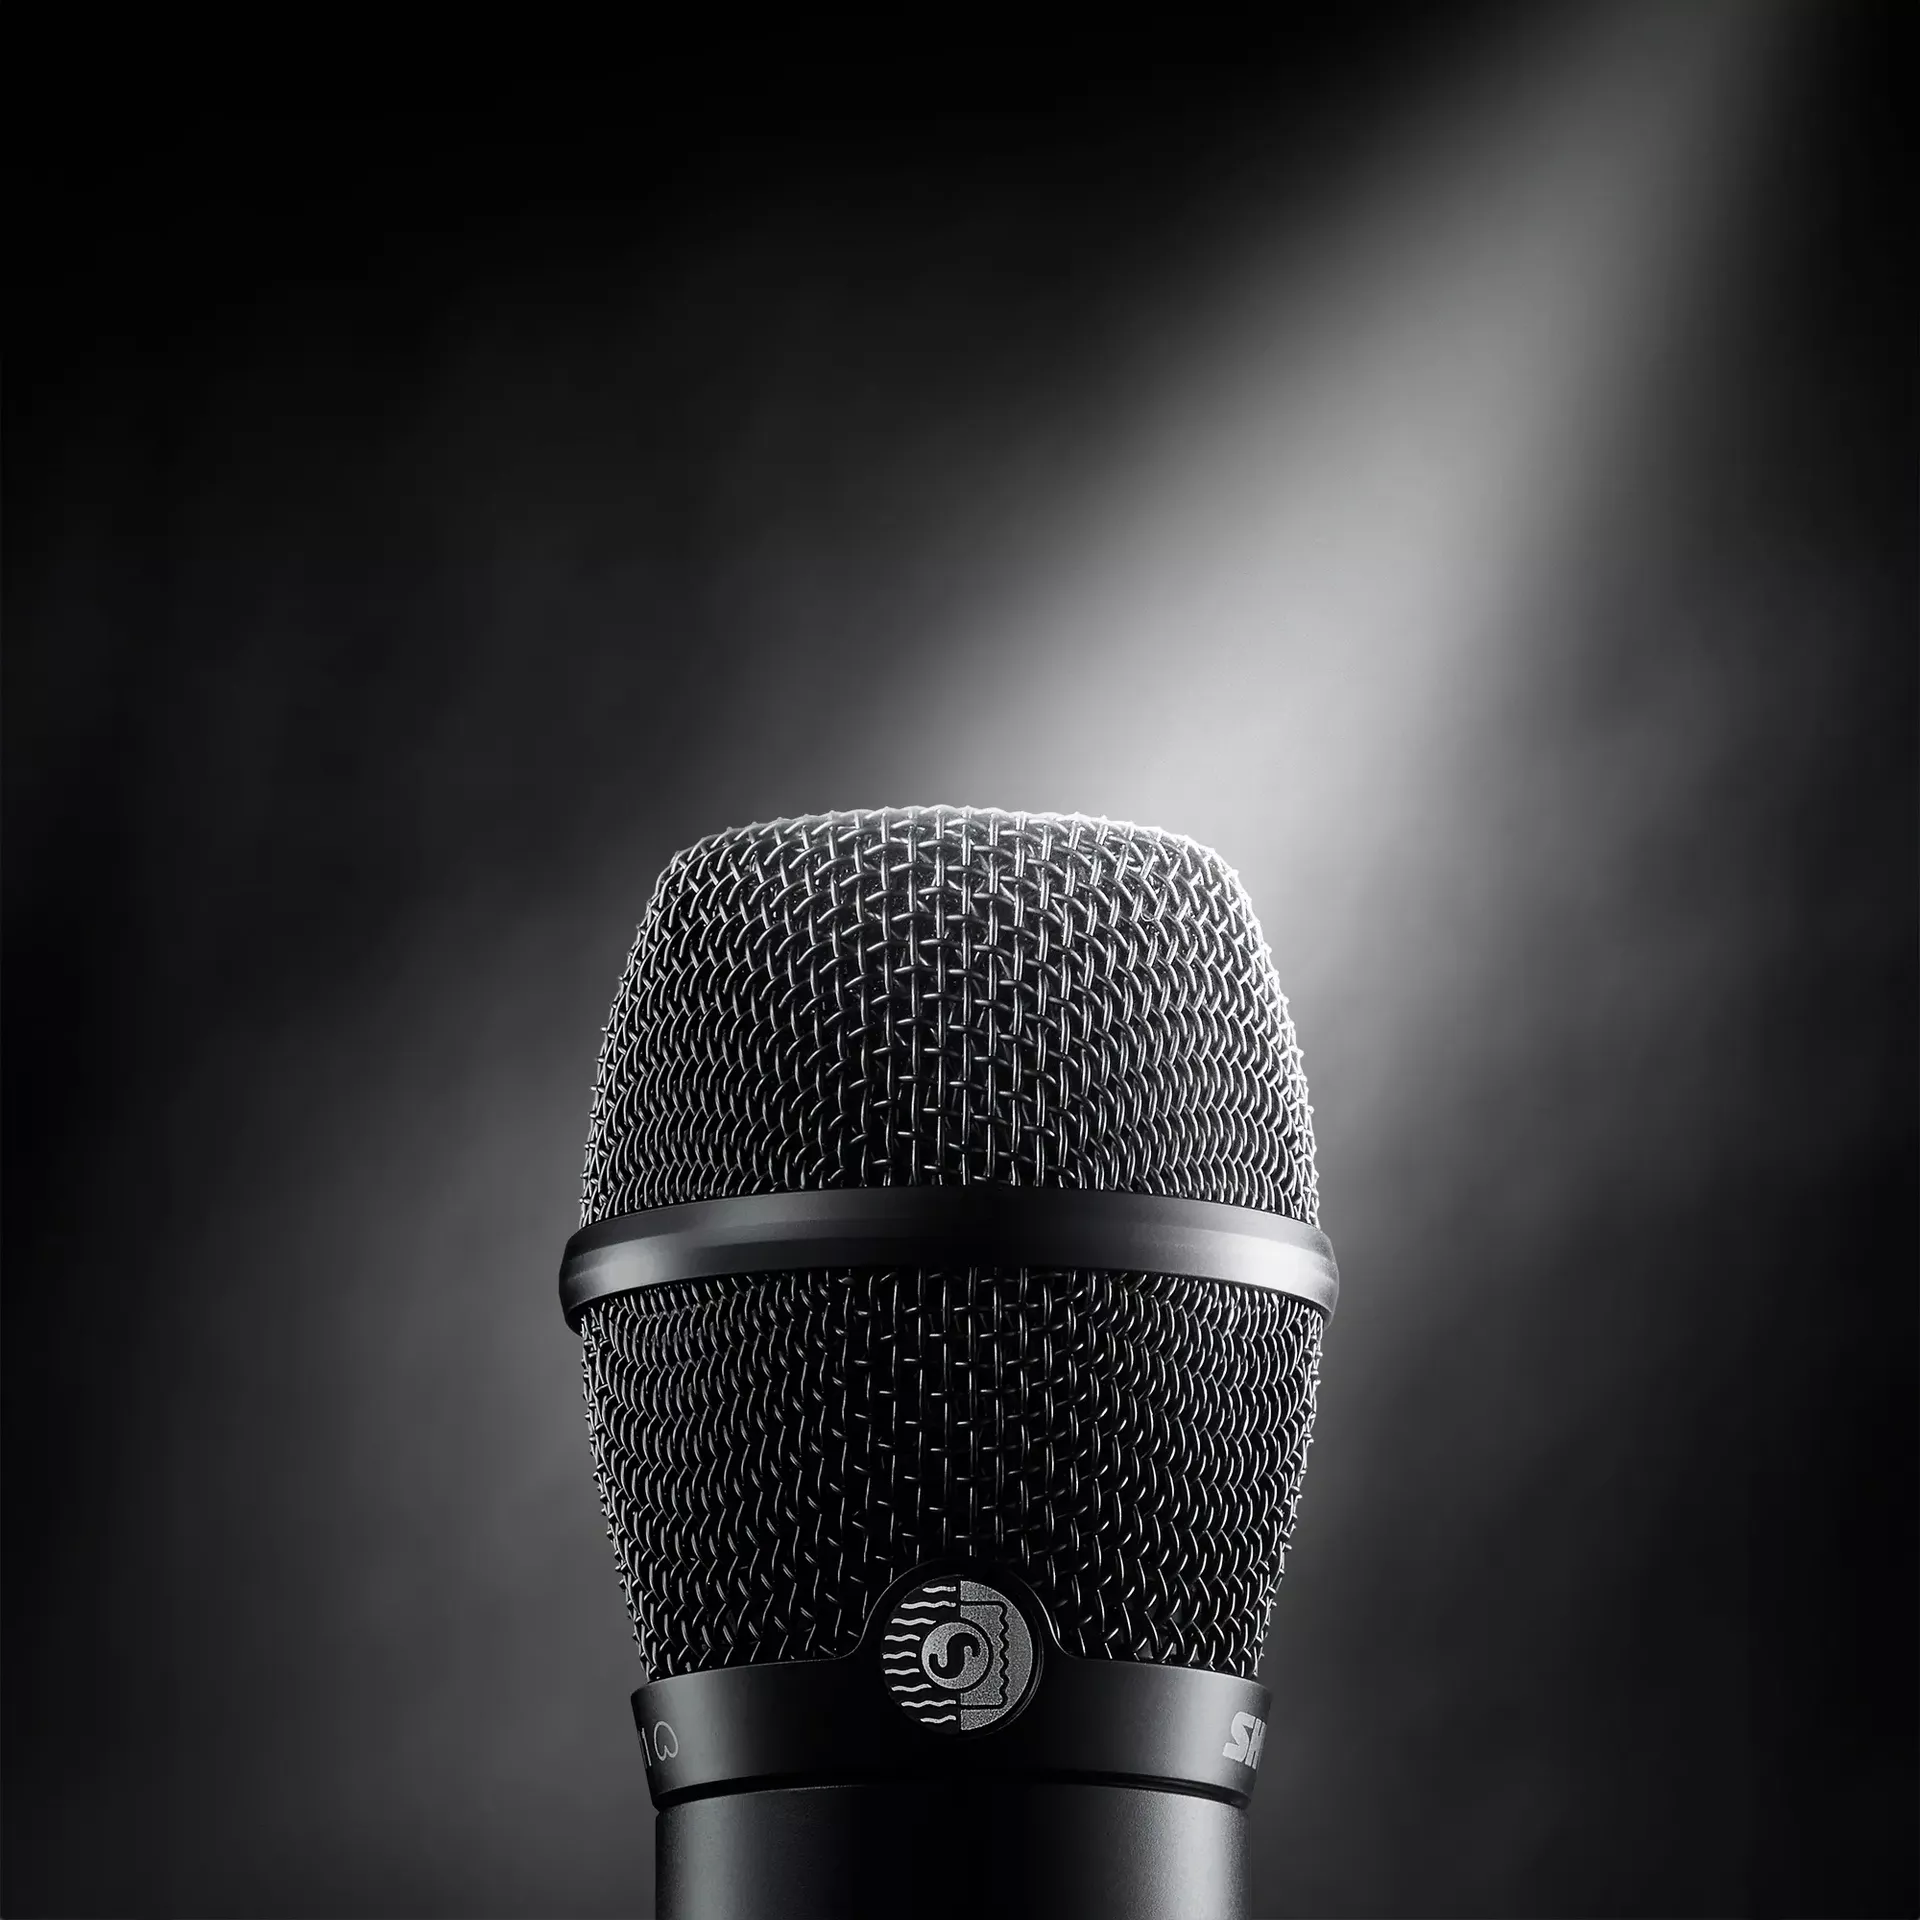 Microphone Live on the App Store